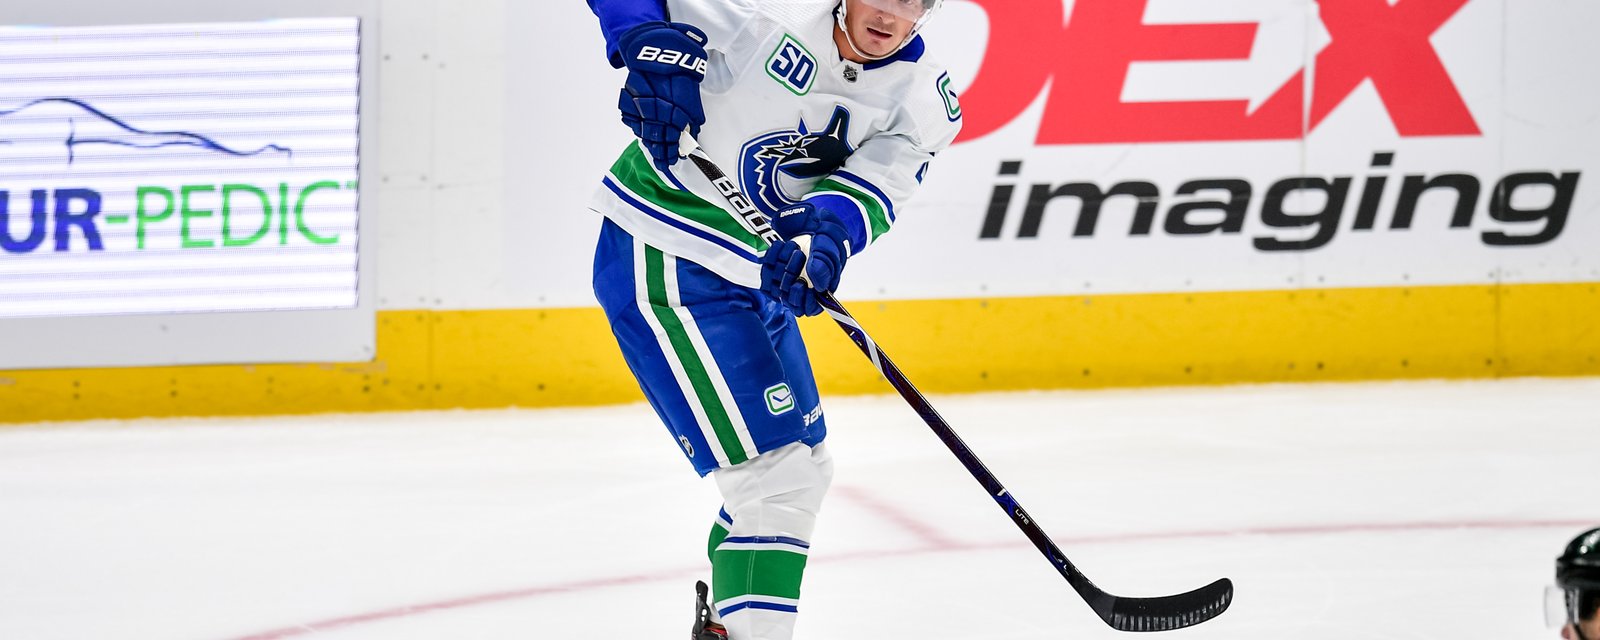 Eriksson and Baertschi get axed ahead of game in Nashville